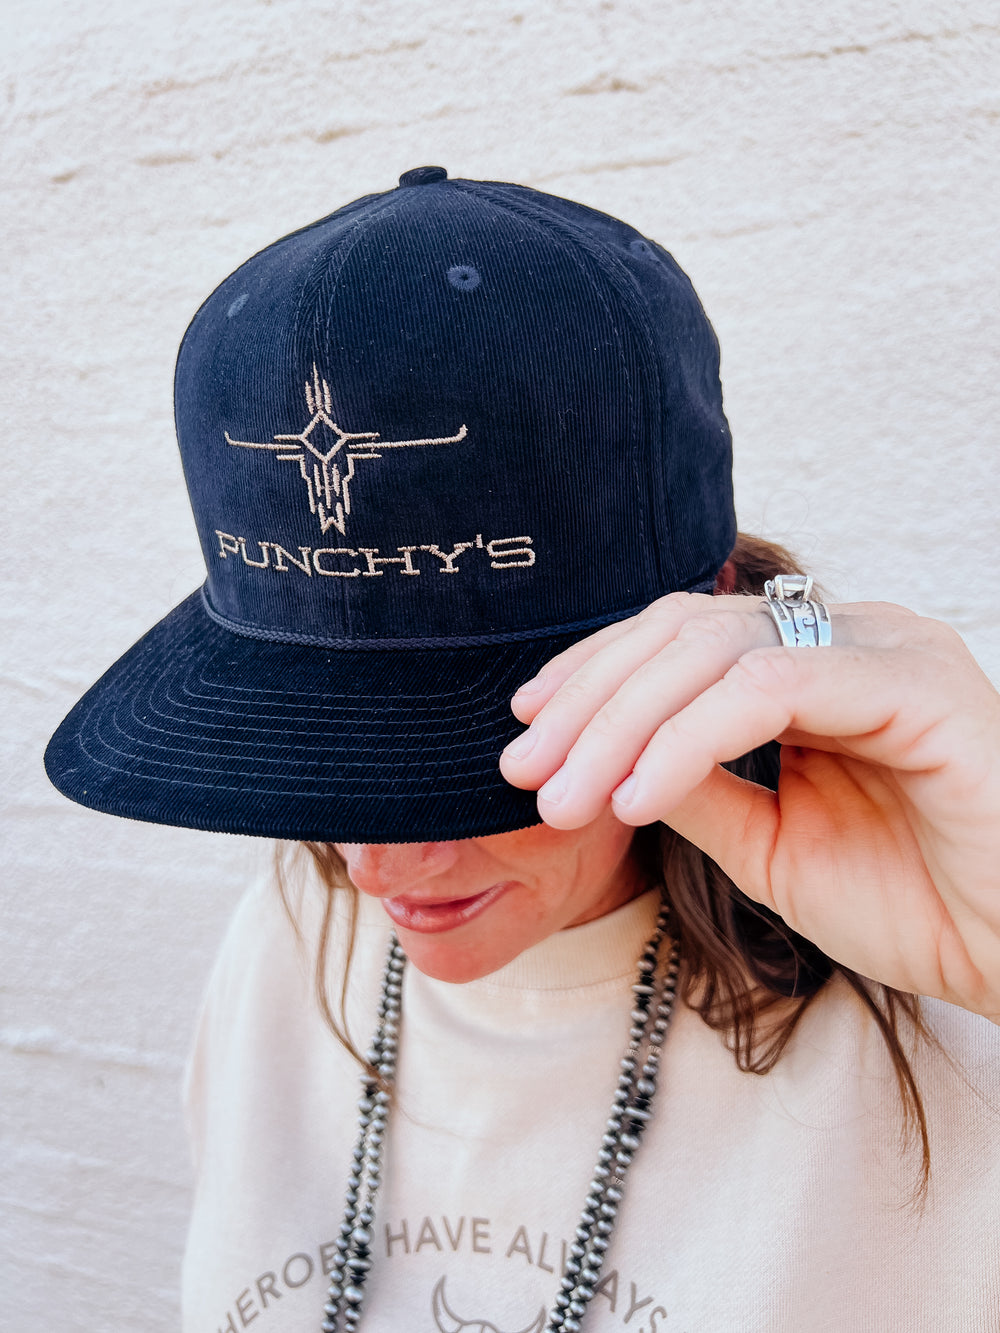 Punchy's Corduroy Trucker Caps Black/Black with Pink Embroidery